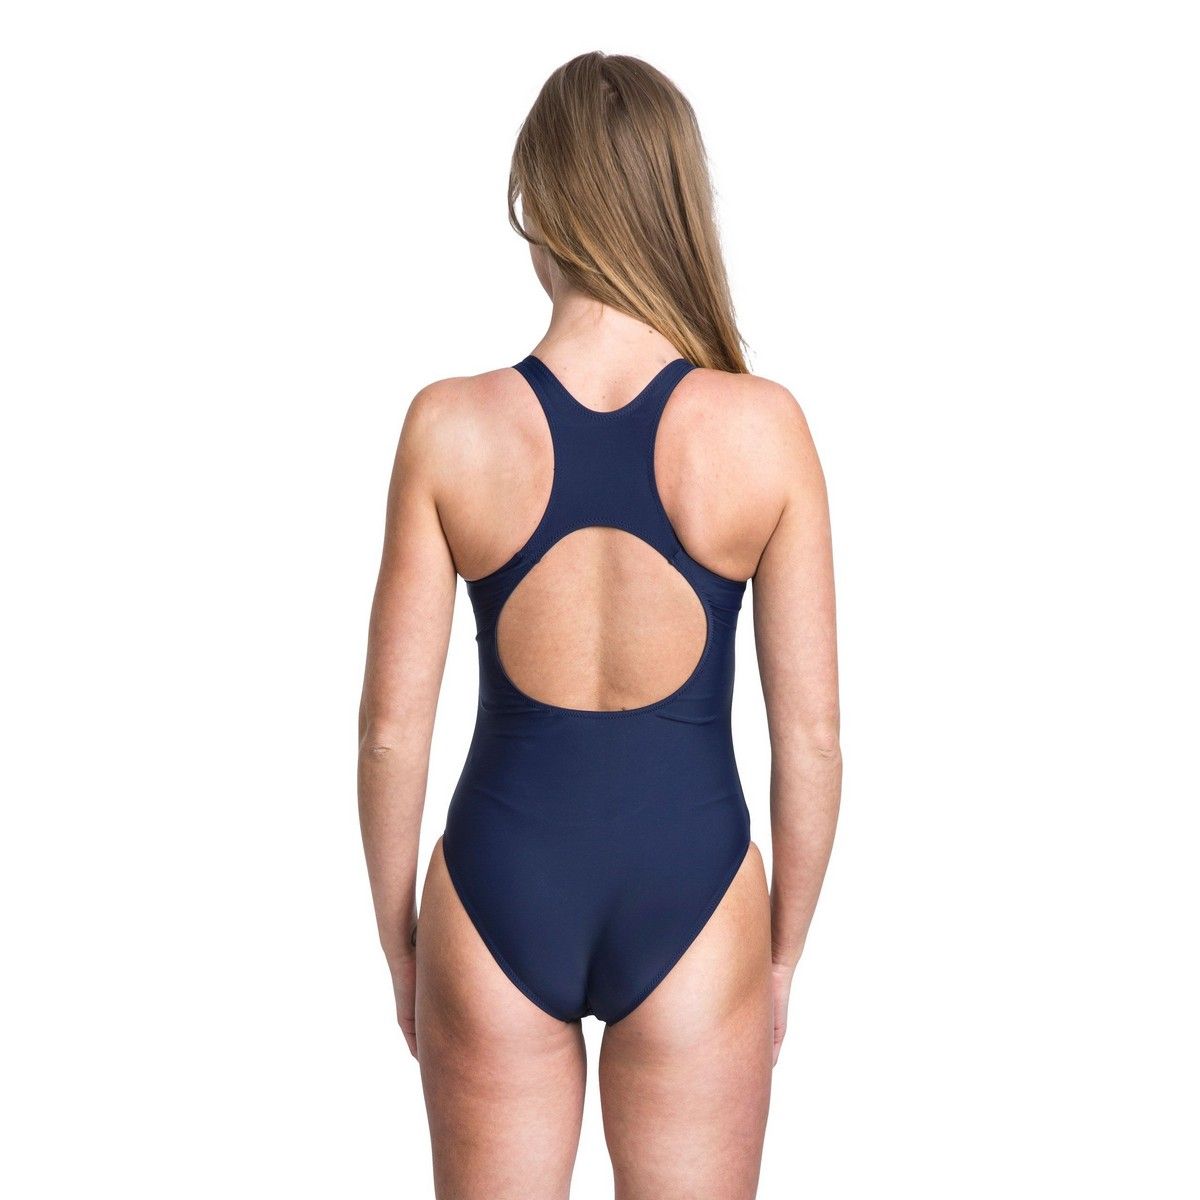 Swimming costume with inner crop top for support. Lined gusset. 80% polyamide, 20% elastane. Trespass Womens Chest Sizing (approx): XS/8 - 32in/81cm, S/10 - 34in/86cm, M/12 - 36in/91.4cm, L/14 - 38in/96.5cm, XL/16 - 40in/101.5cm, XXL/18 - 42in/106.5cm.